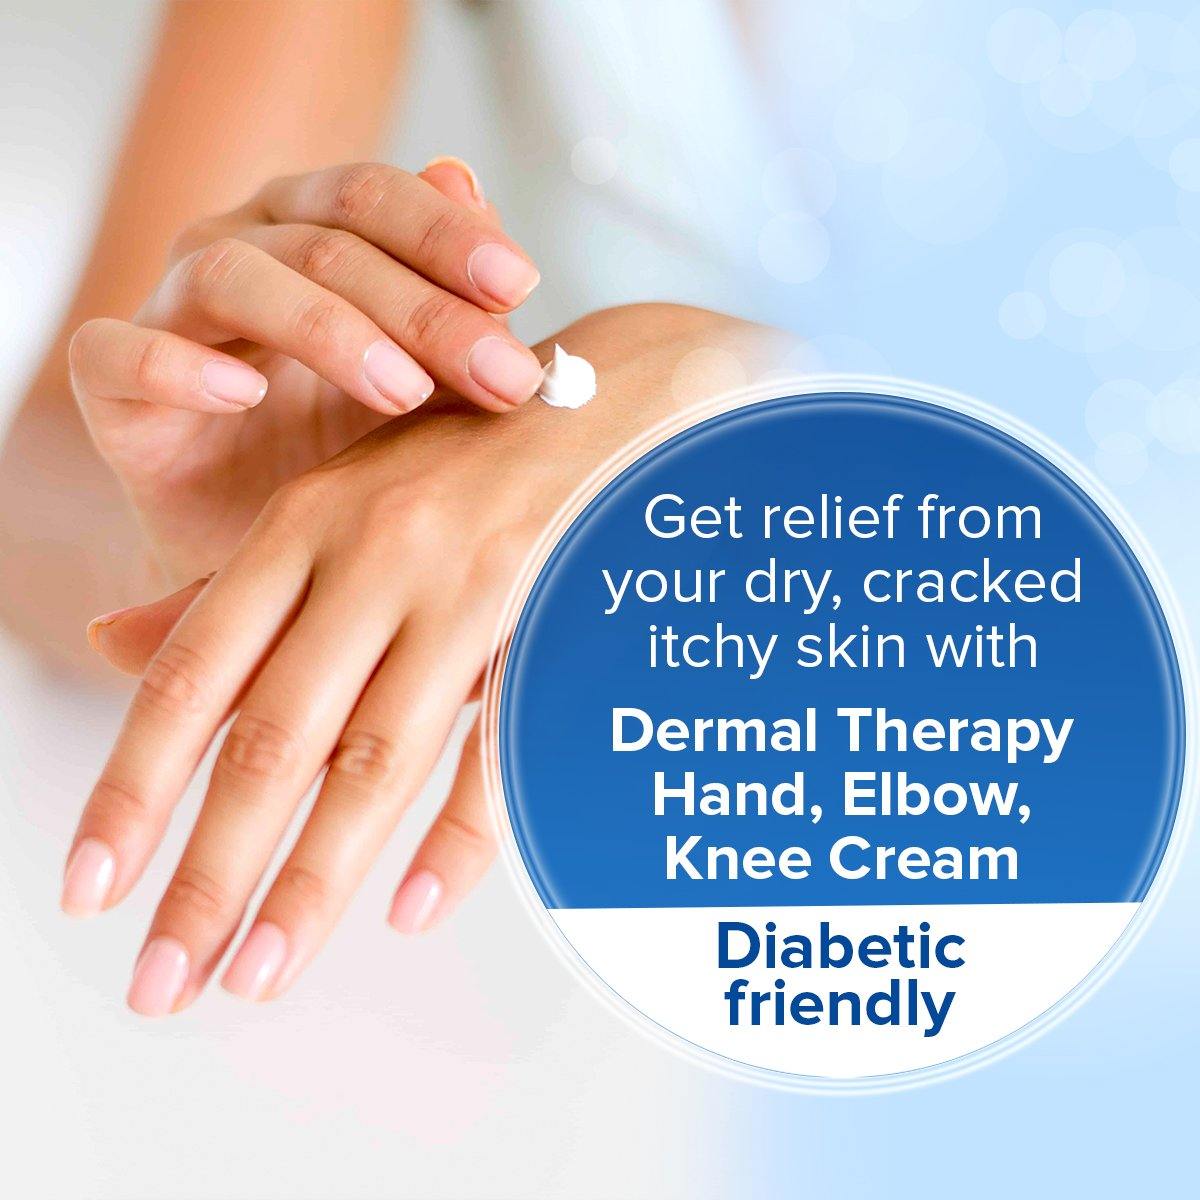 Hand, Elbow & Knee Cream - Dermal Therapy